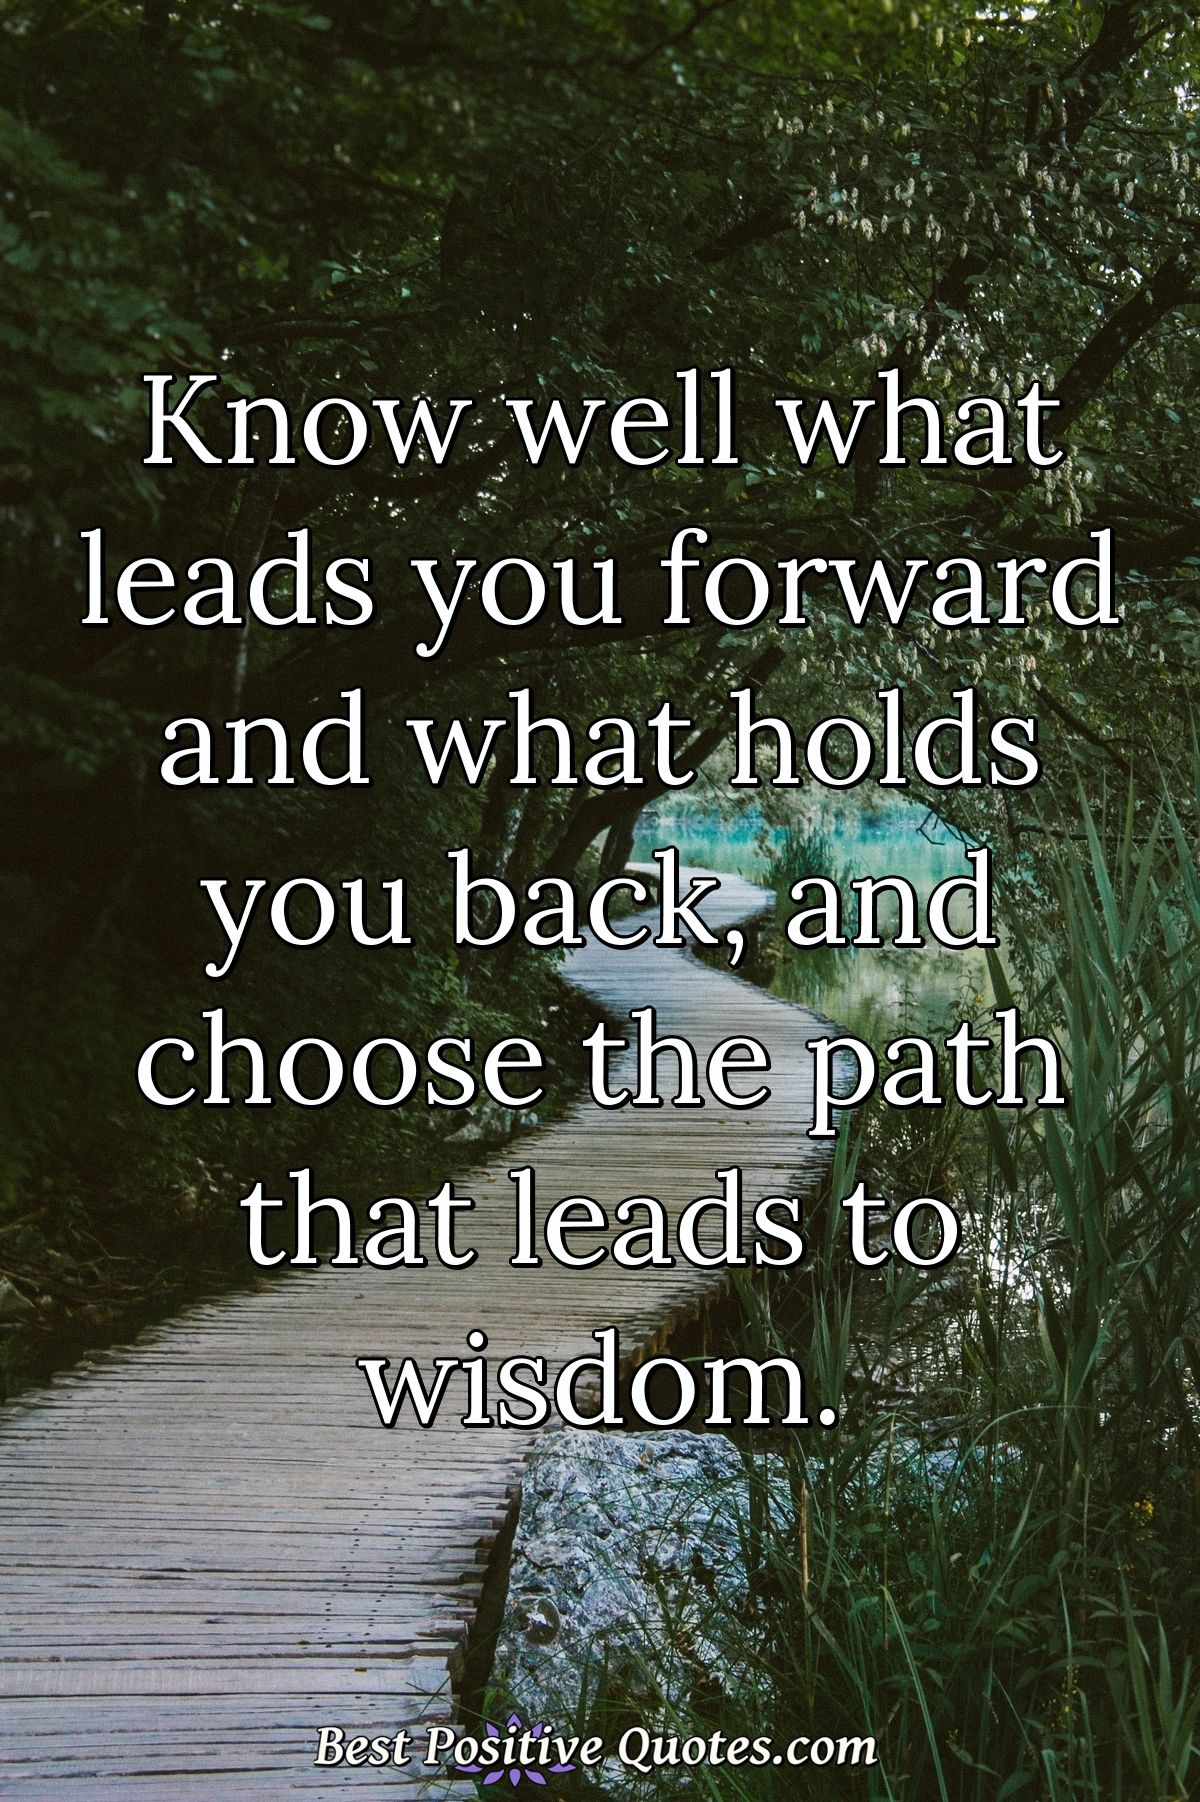 Know well what leads you forward and what holds you back, and choose the path that leads to wisdom. - Anonymous